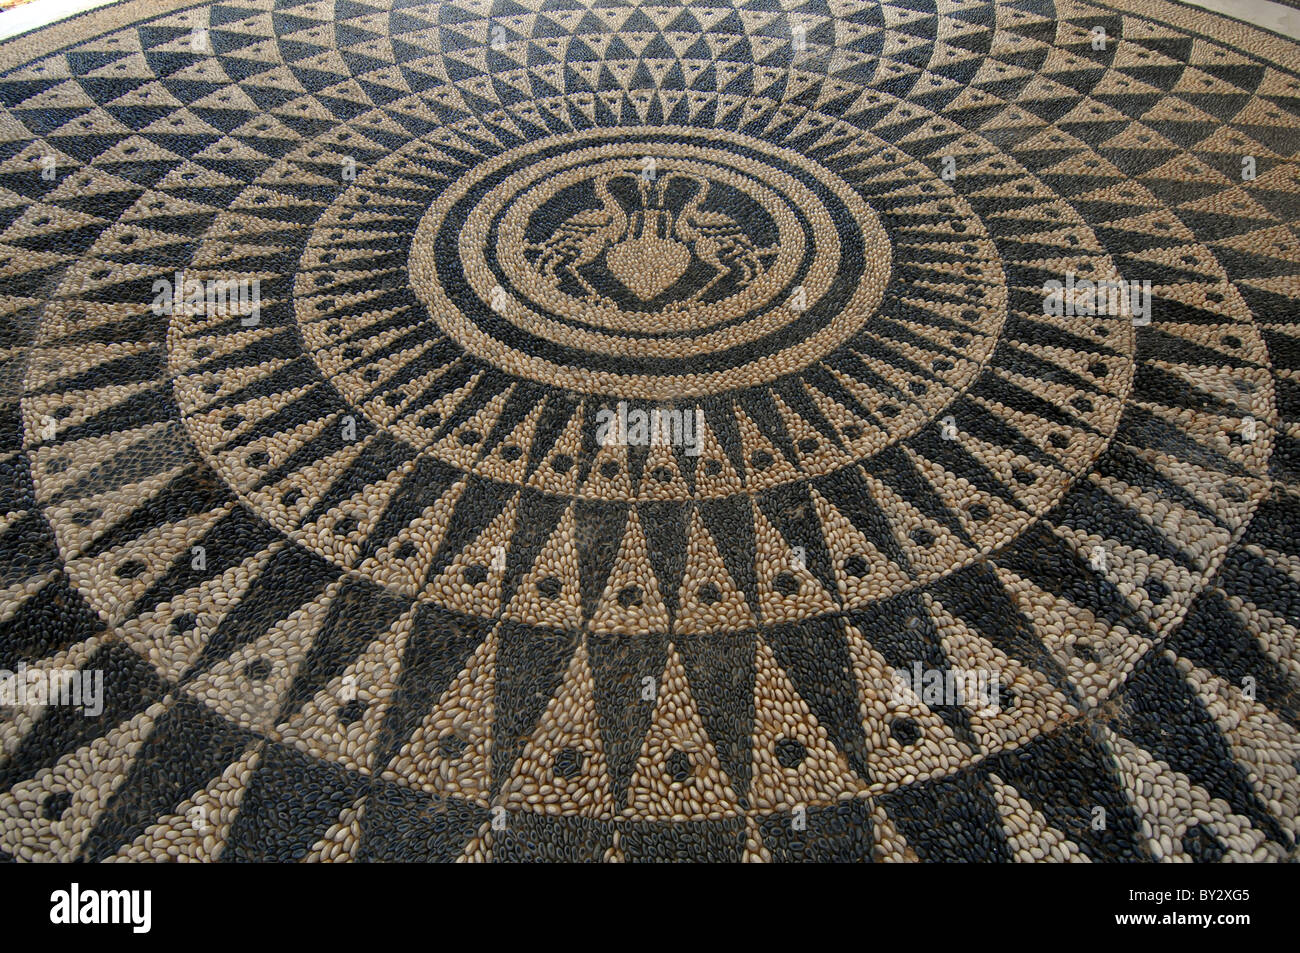 Kalithea Thermal Spa, Rhodes: its ornate pebble mosaic floor in traditional greek style. Stock Photo